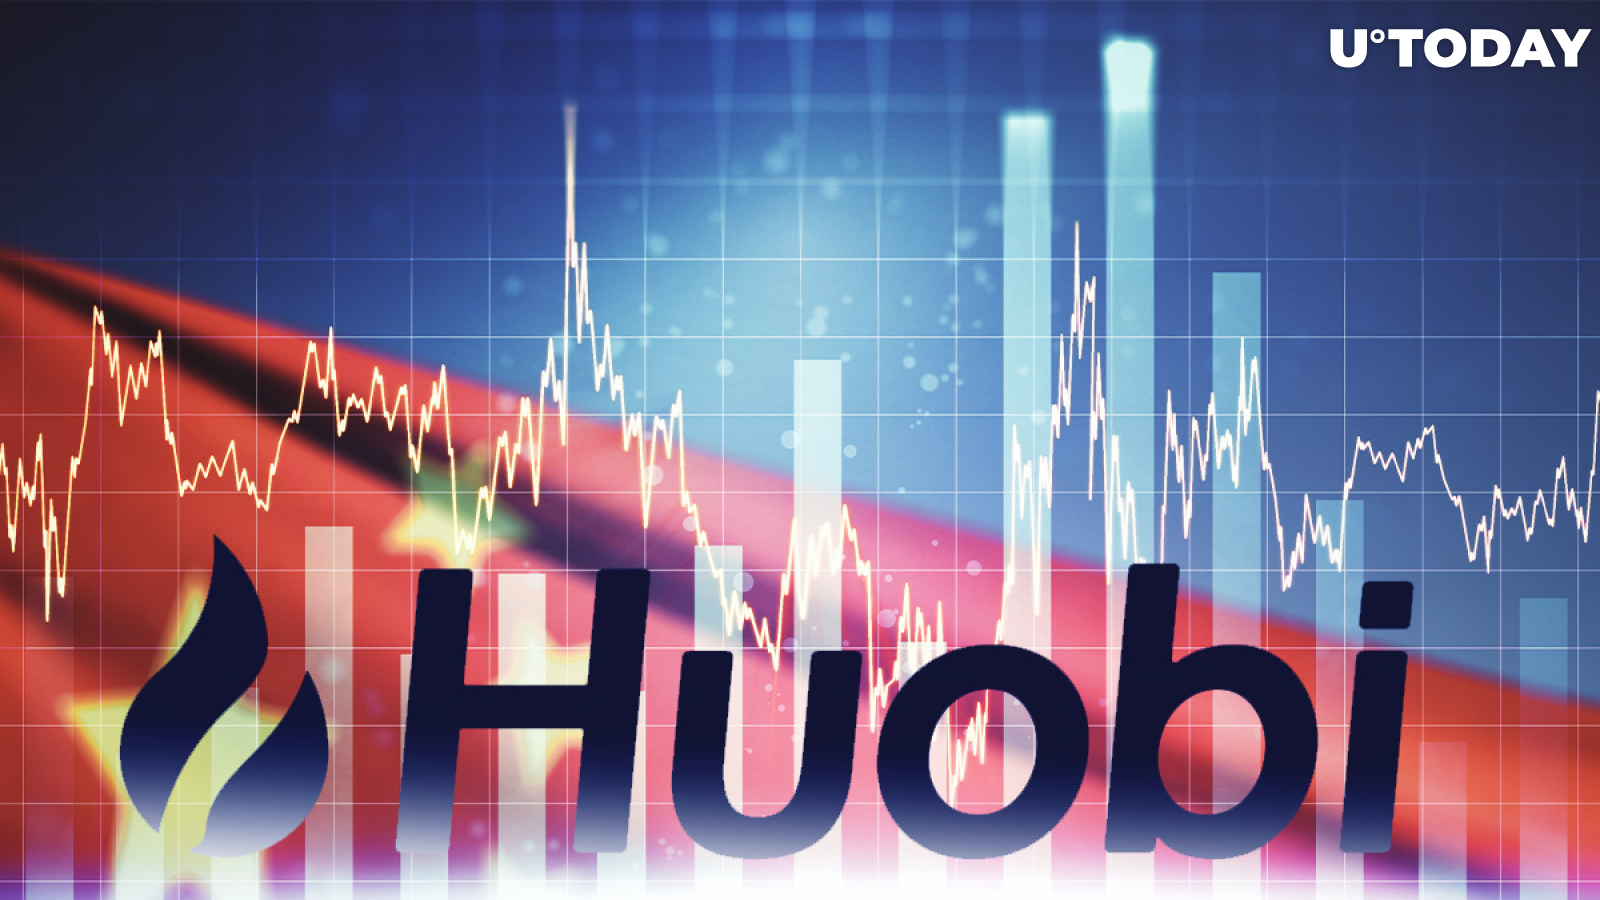 China’s Biggest Exchange Huobi Restricts Leverage Radically, Stops New Users from Trading Derivatives